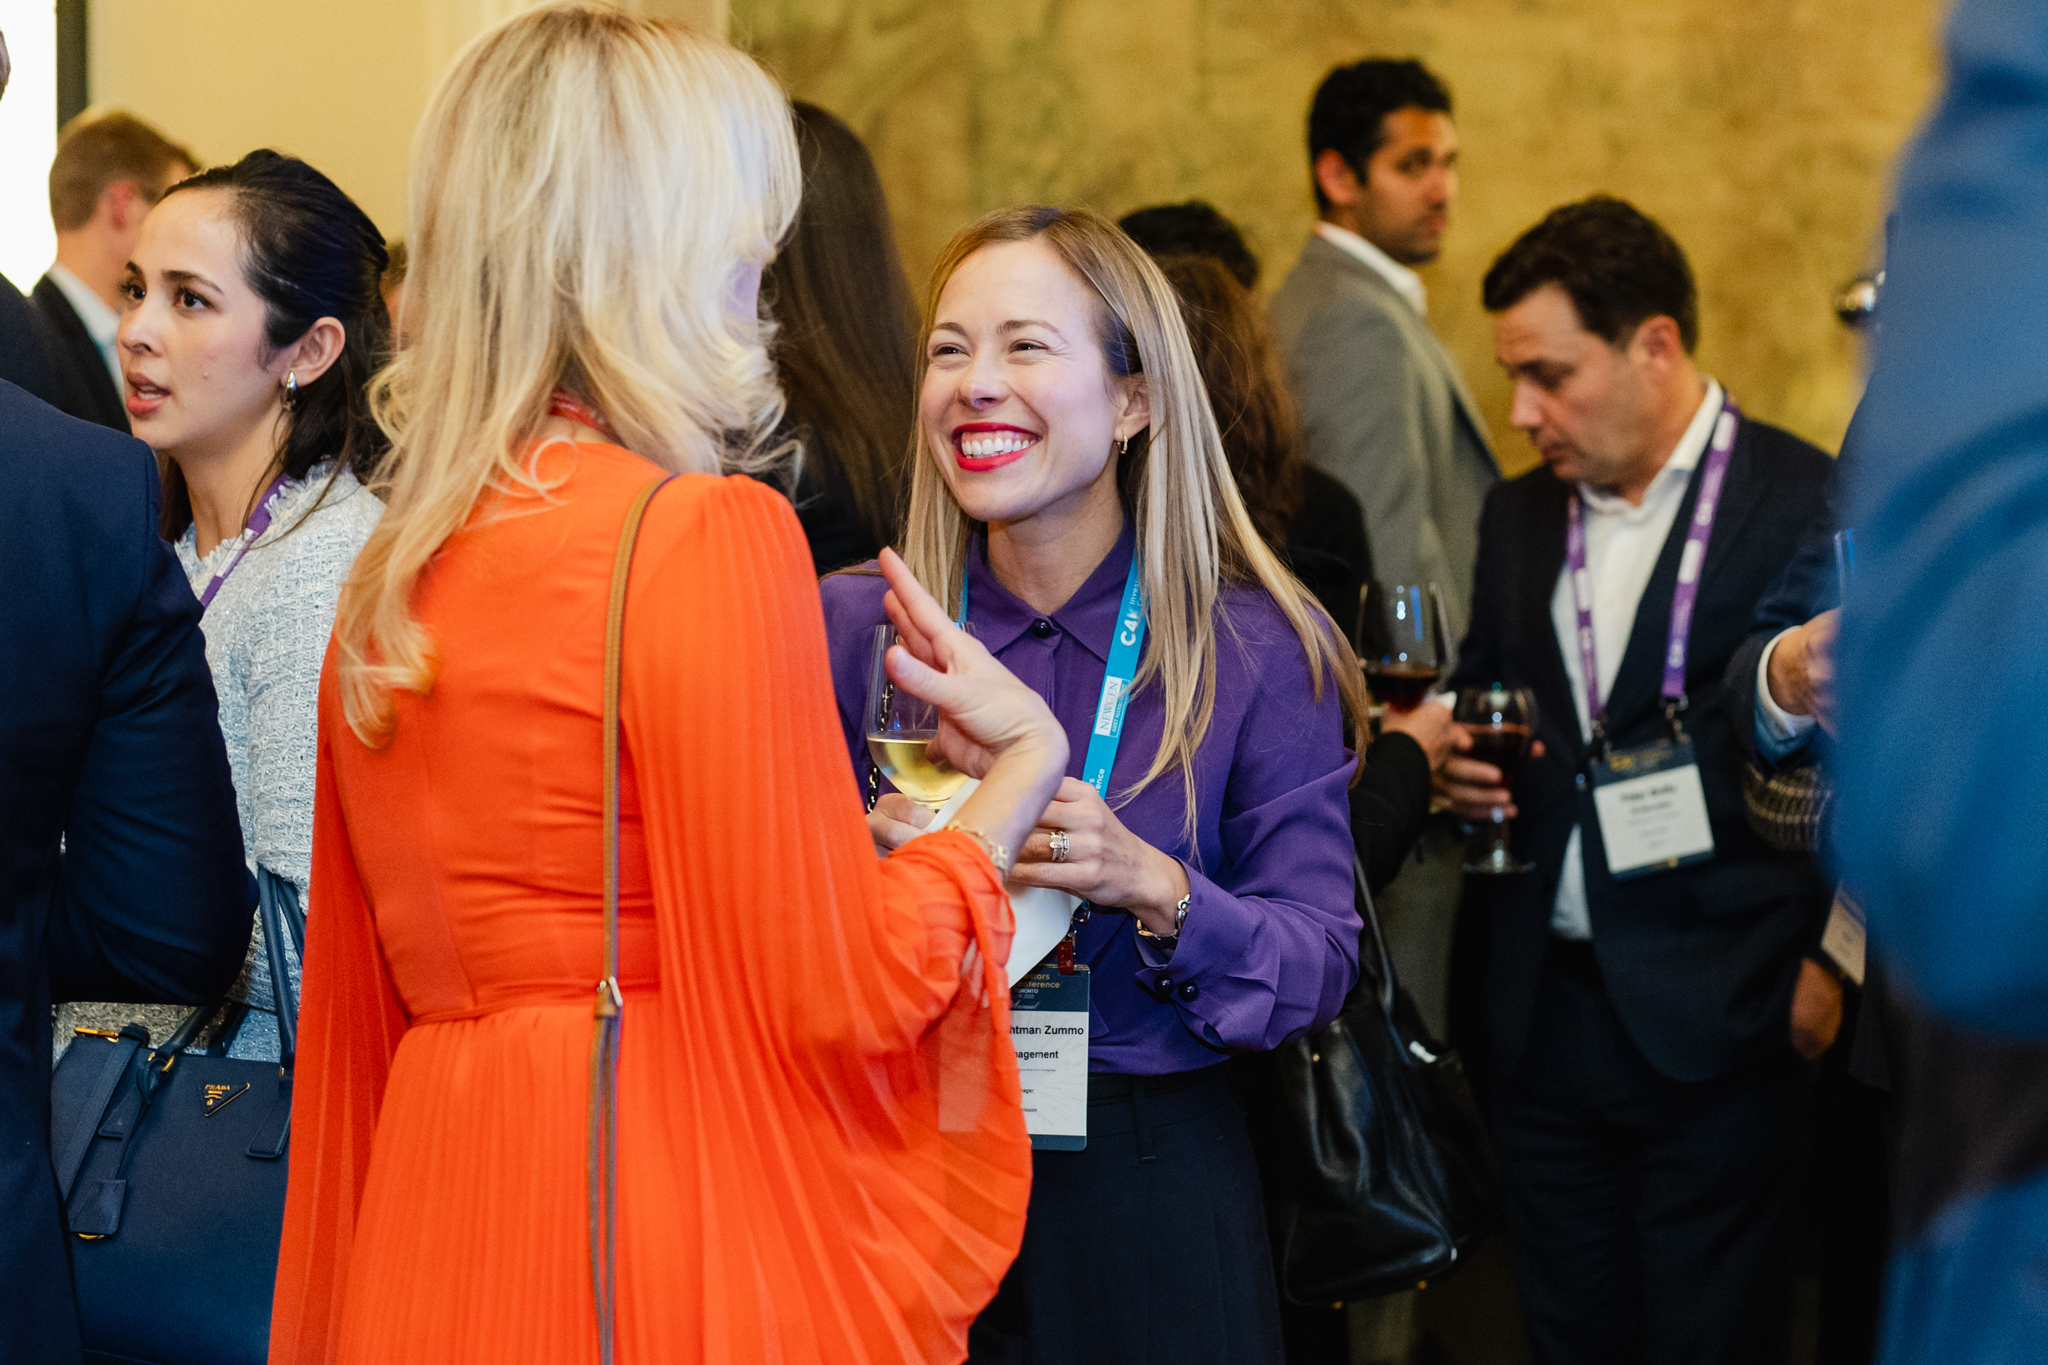 Conference attendees engaged in lively conversations during a business event.